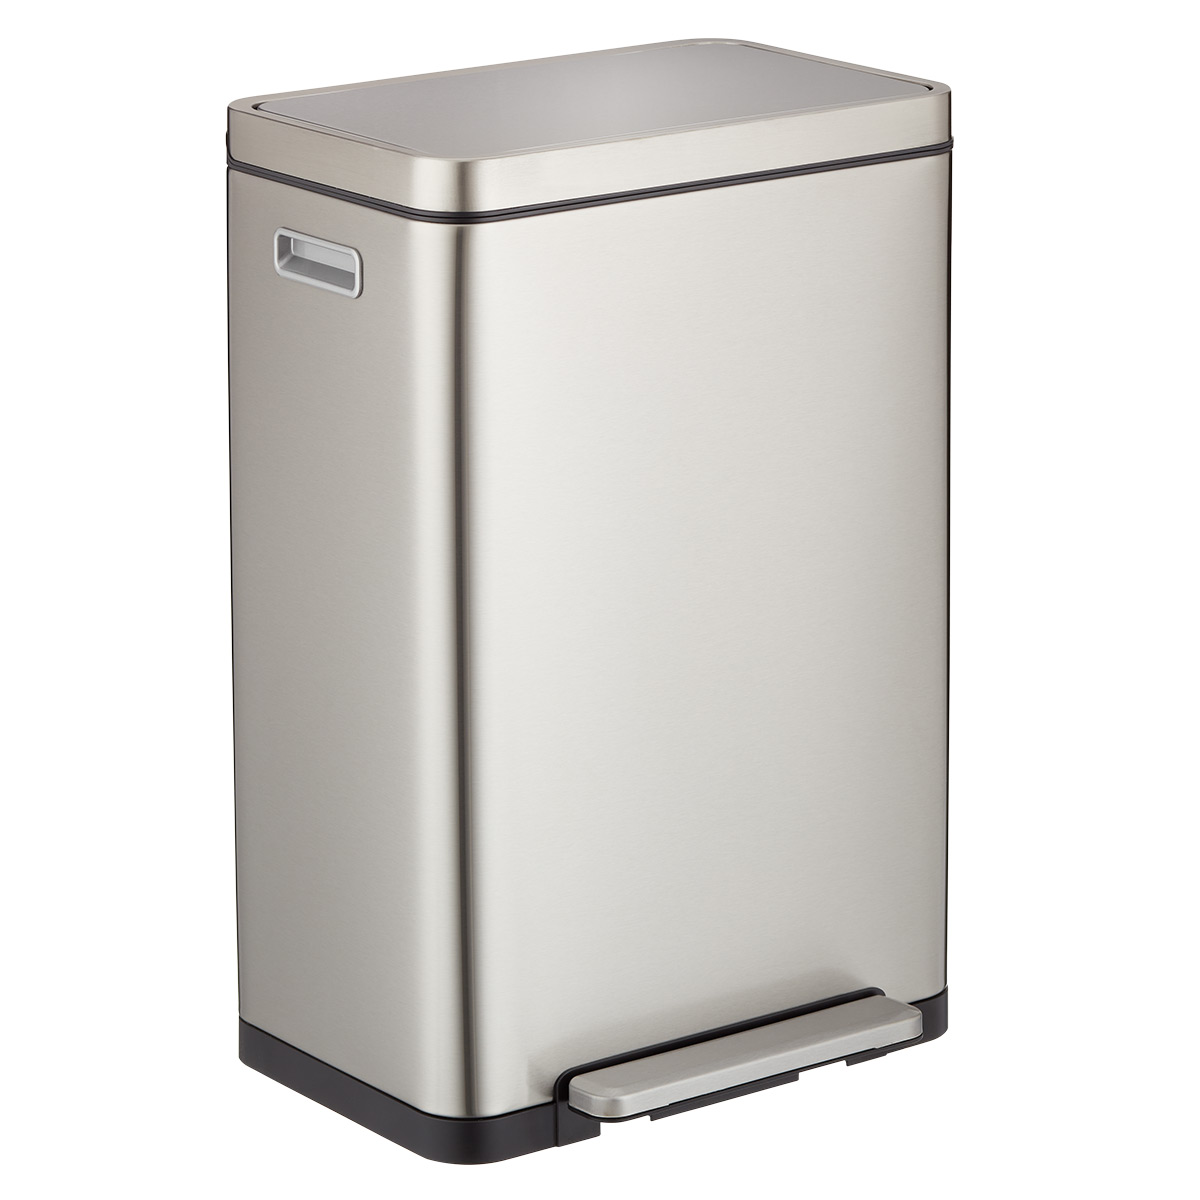 The Container Store 12 gal. Stainless Steel Step Trash Can | The ...